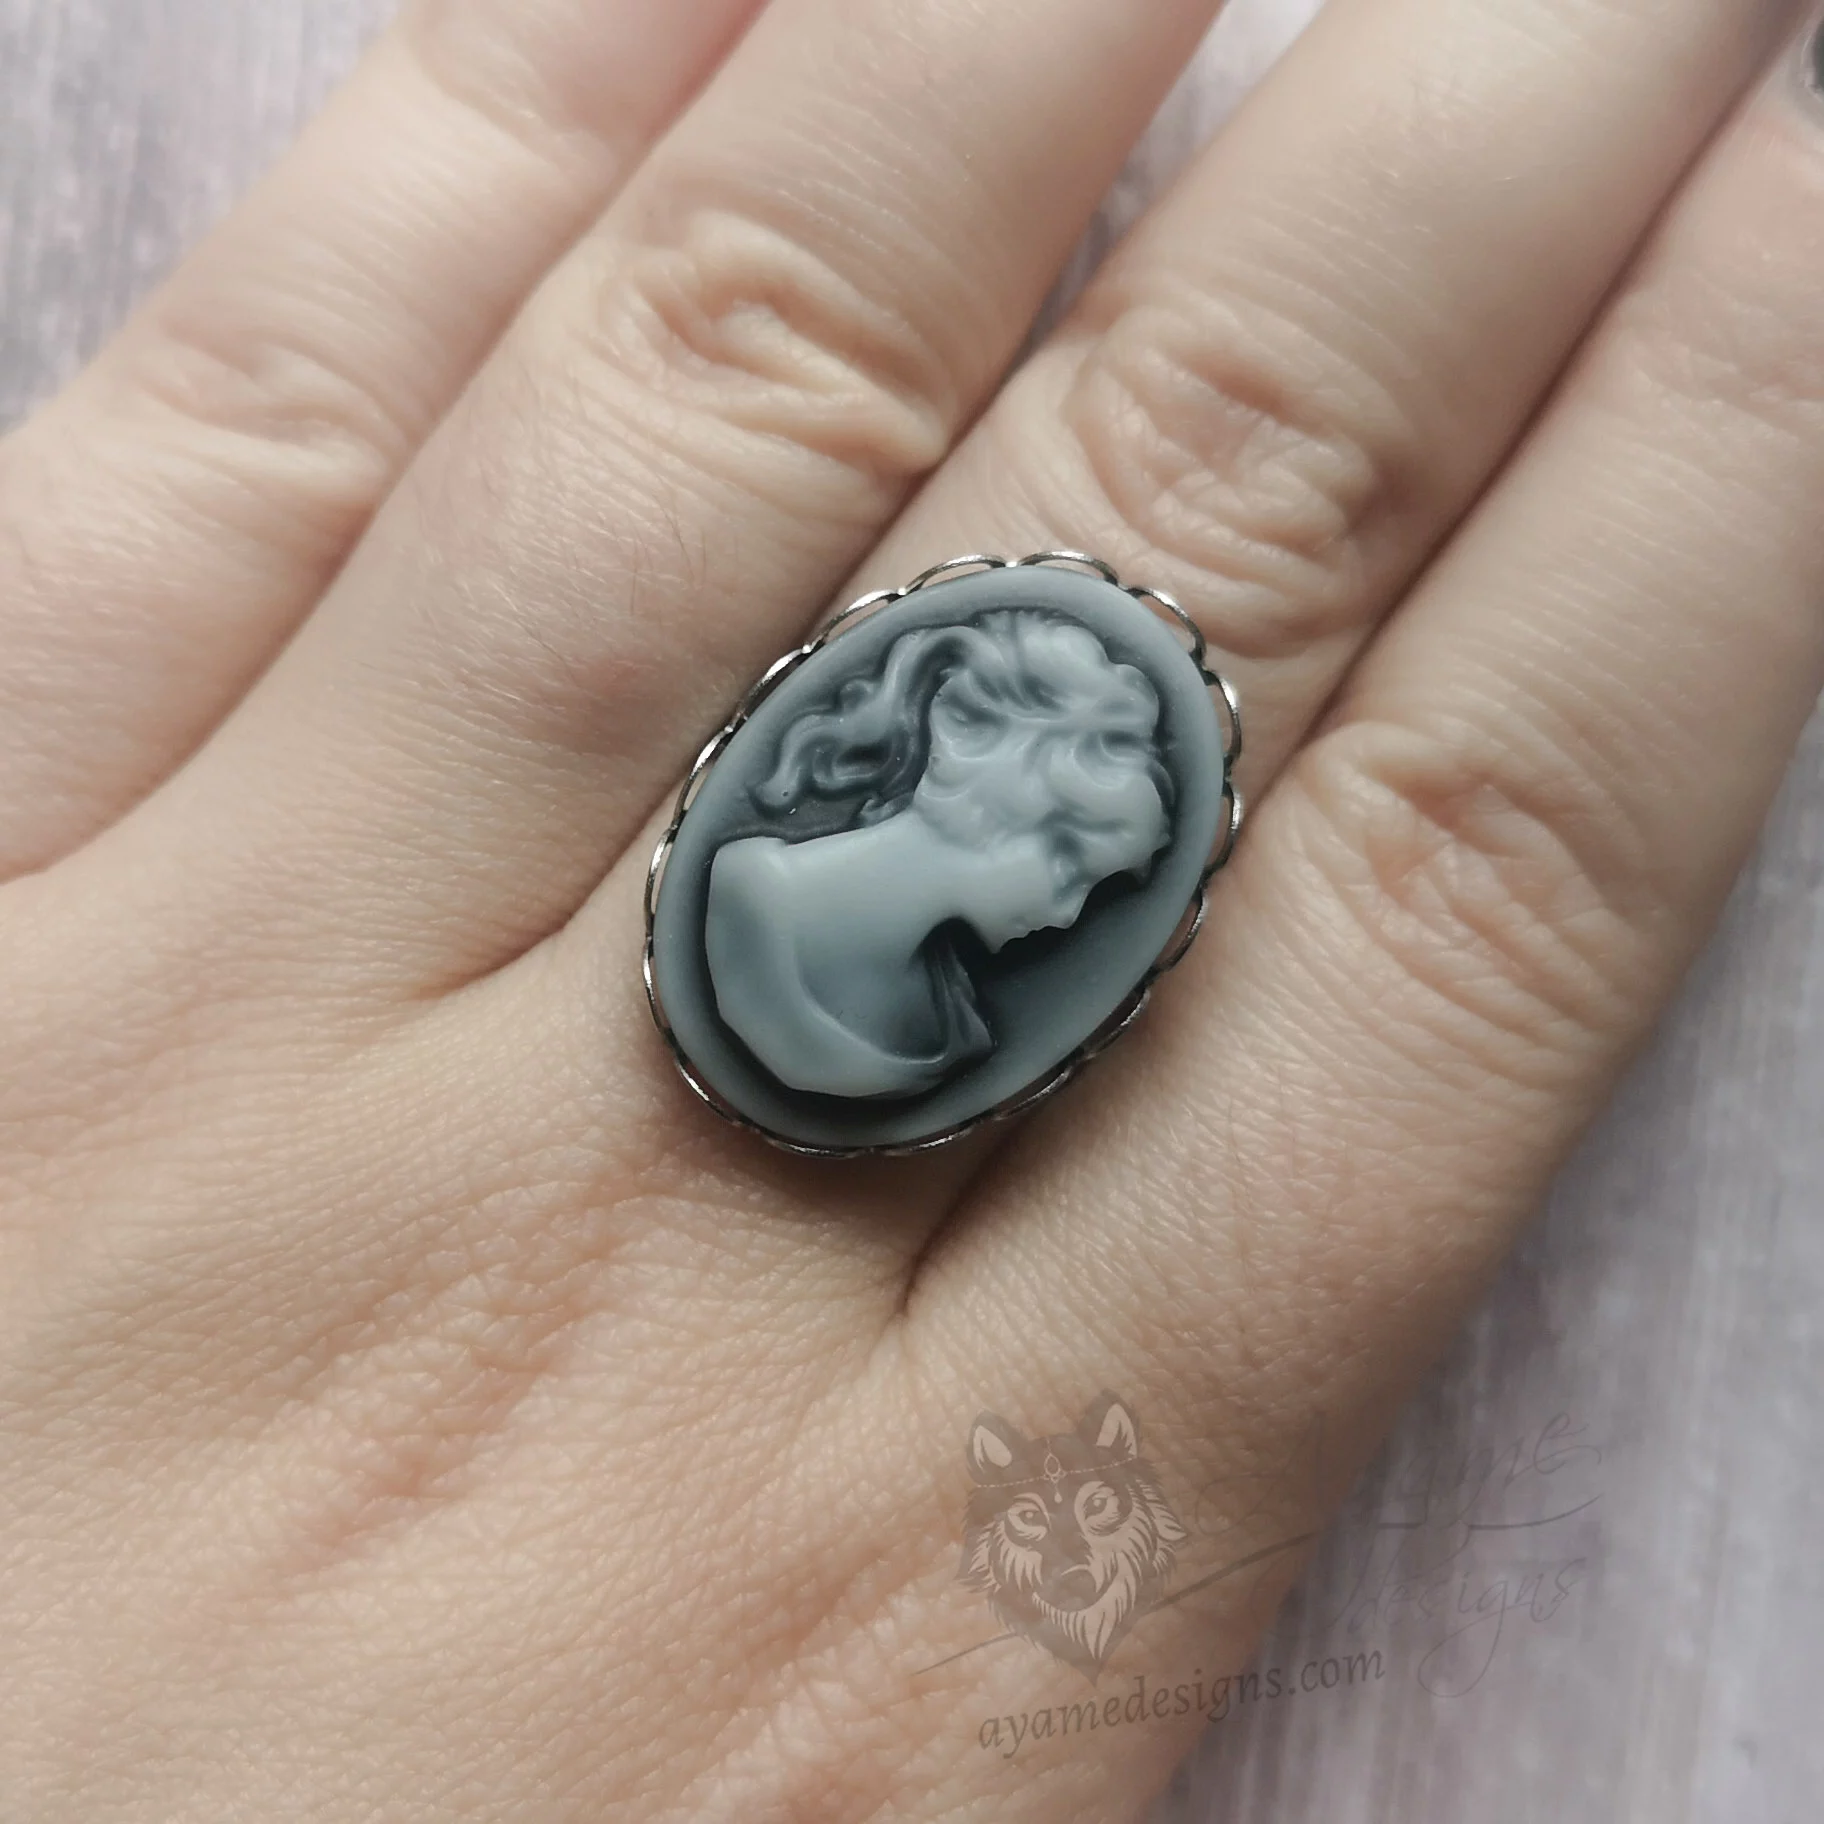 Adjustable stainless steel ring with a Victorian cameo